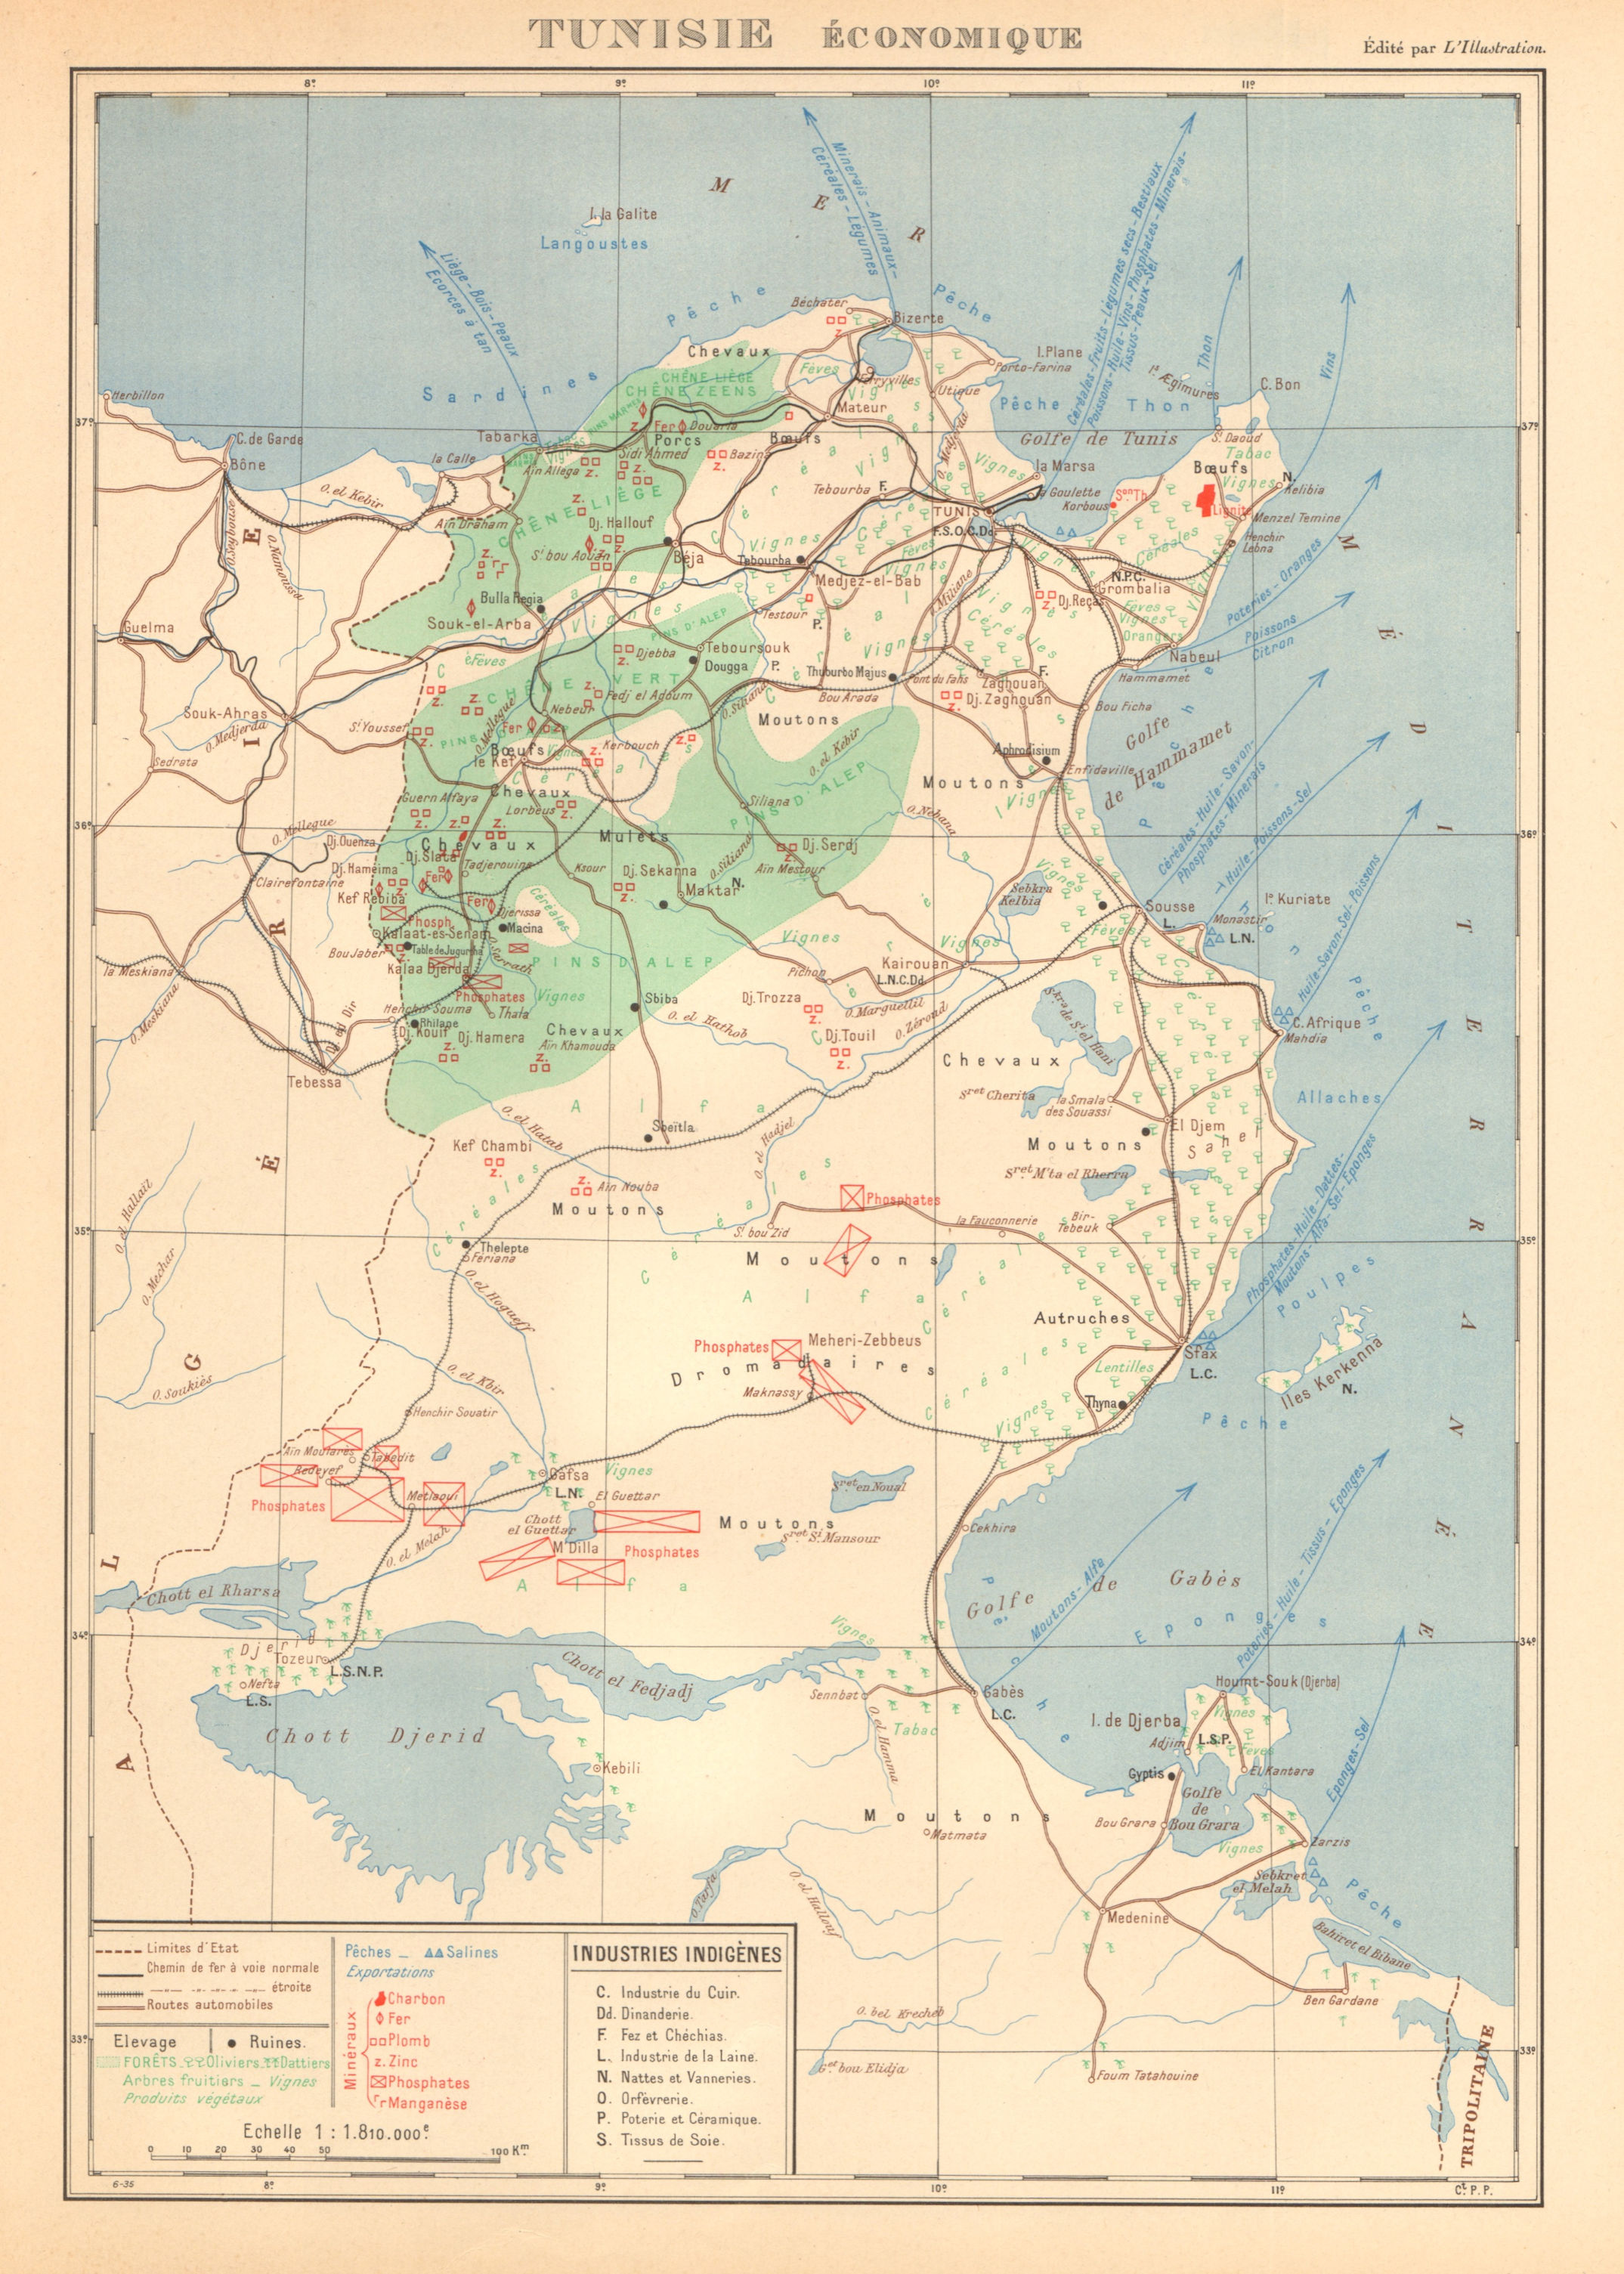 Associate Product FRENCH COLONIAL TUNISIA RESOURCES. Tunisie. Economique Economic 1938 old map